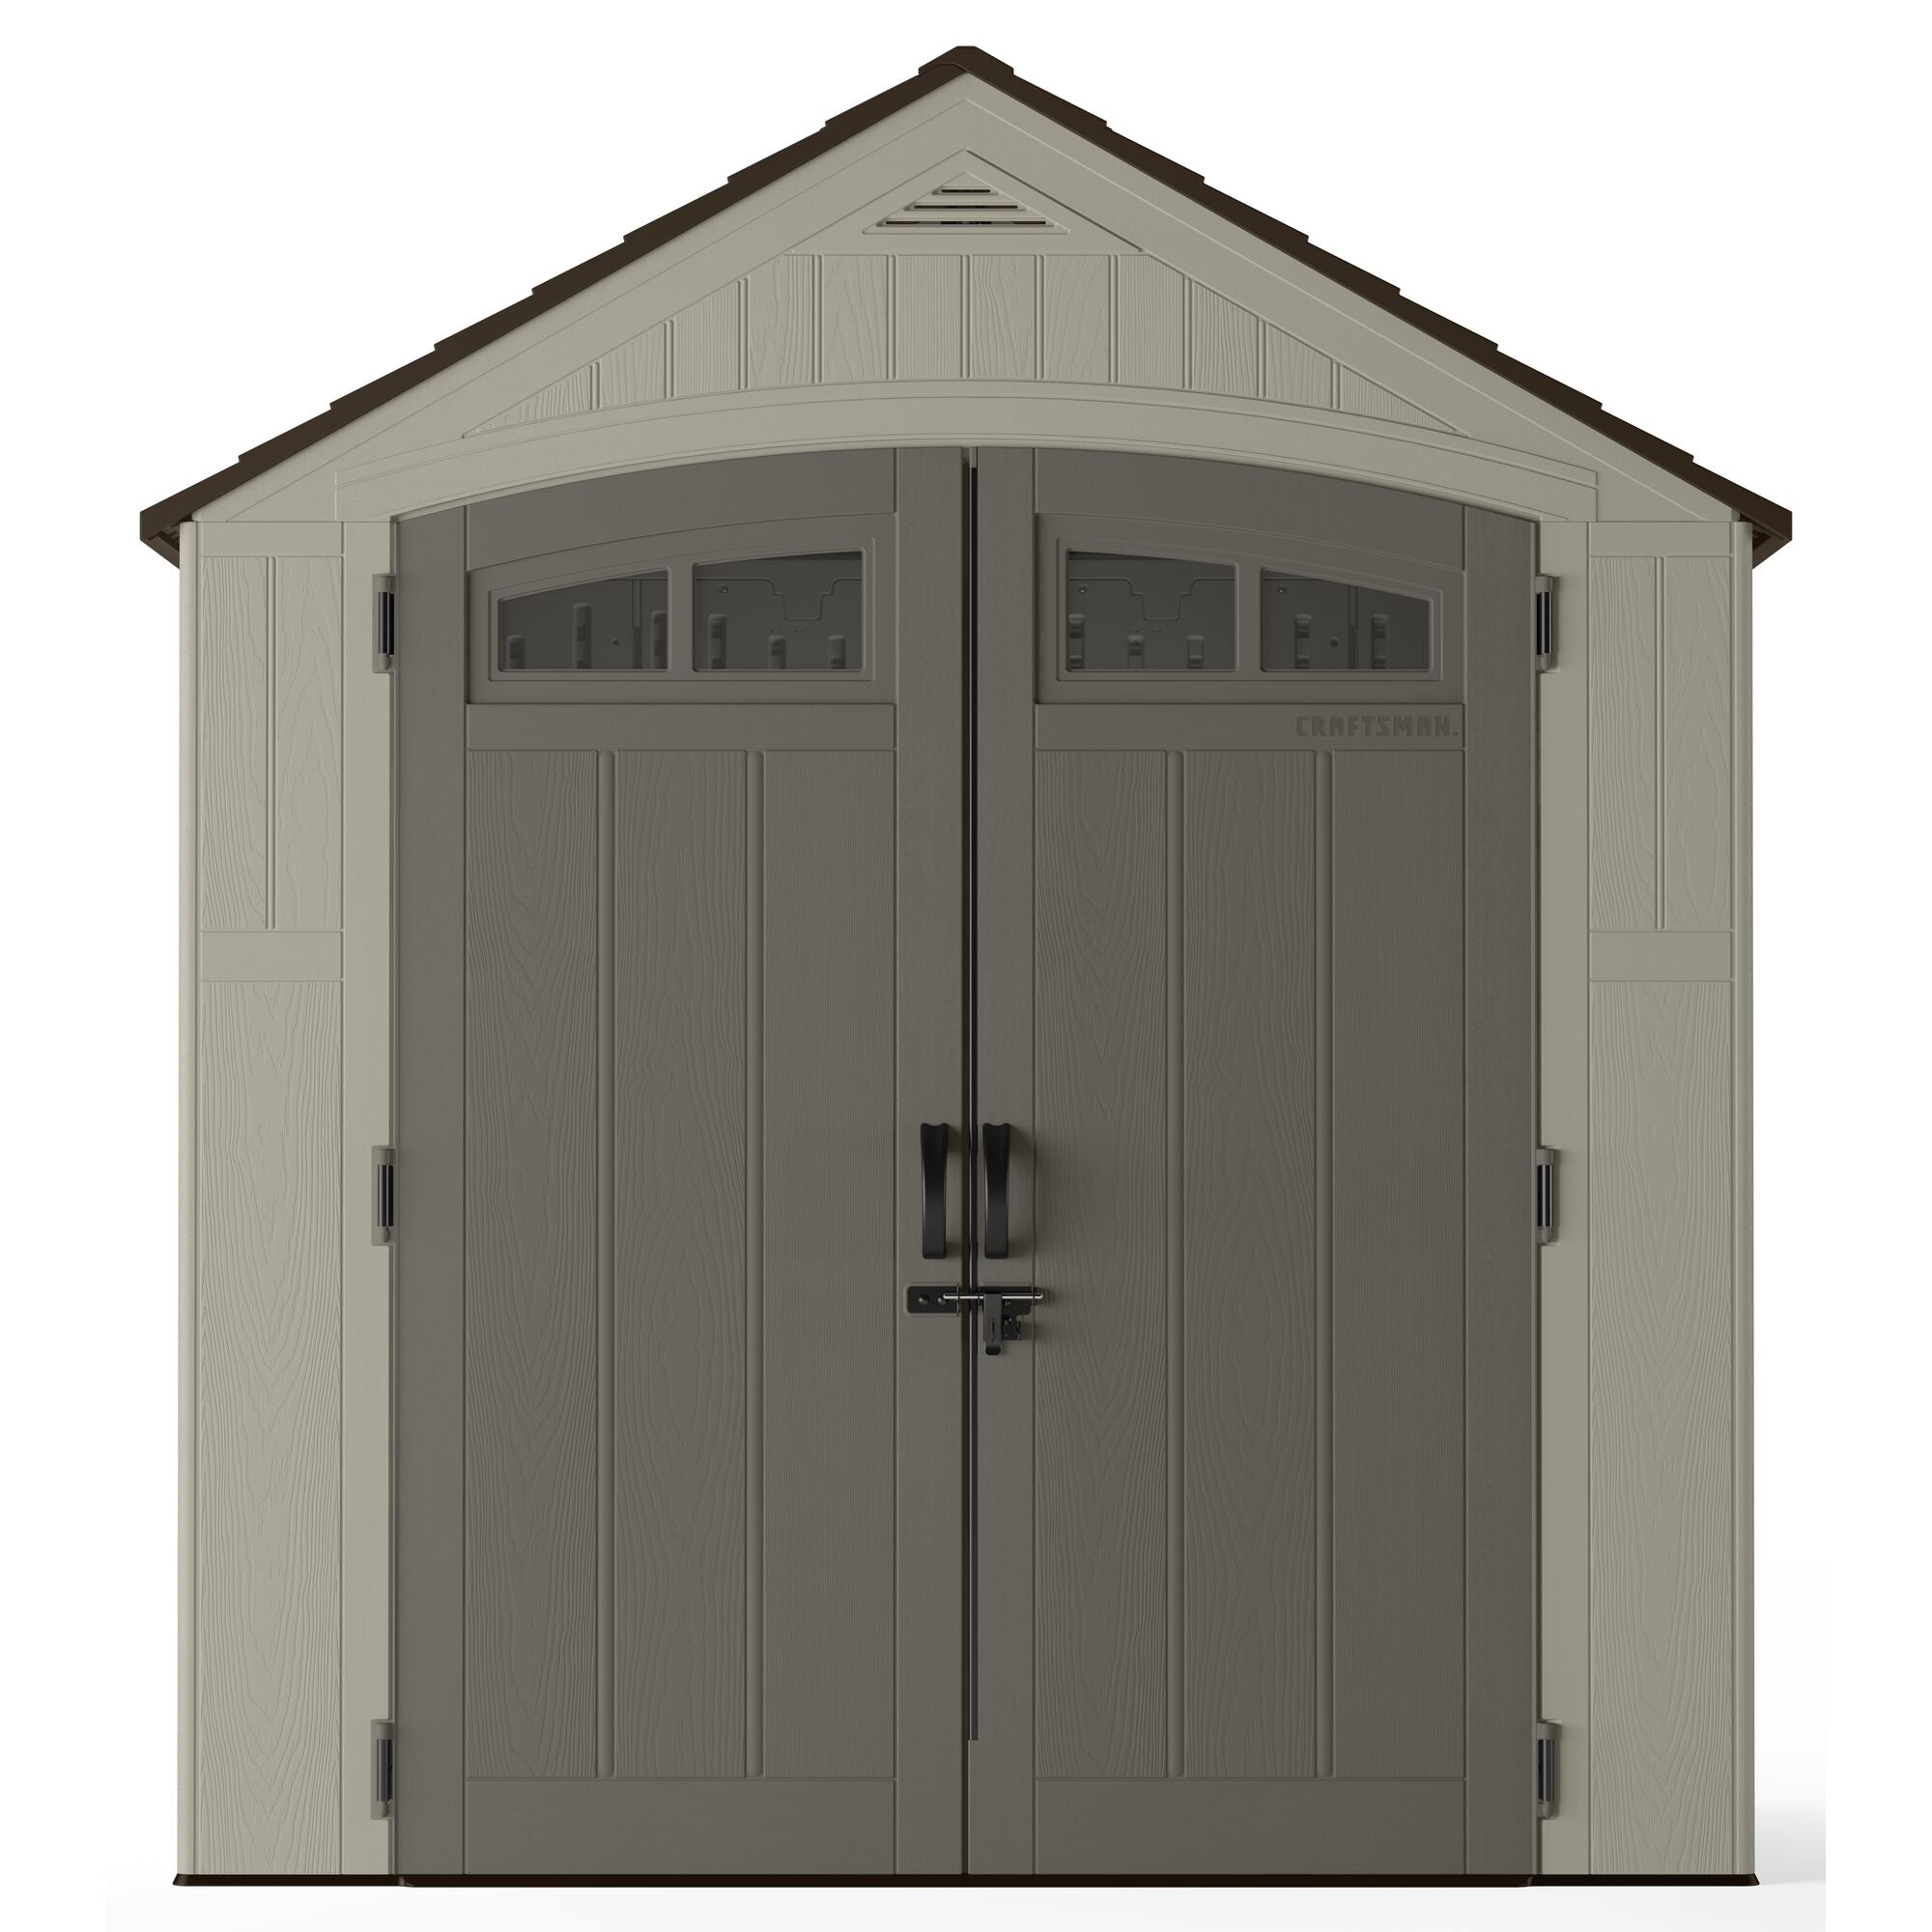 7 foot by 4 foot Storage shed.